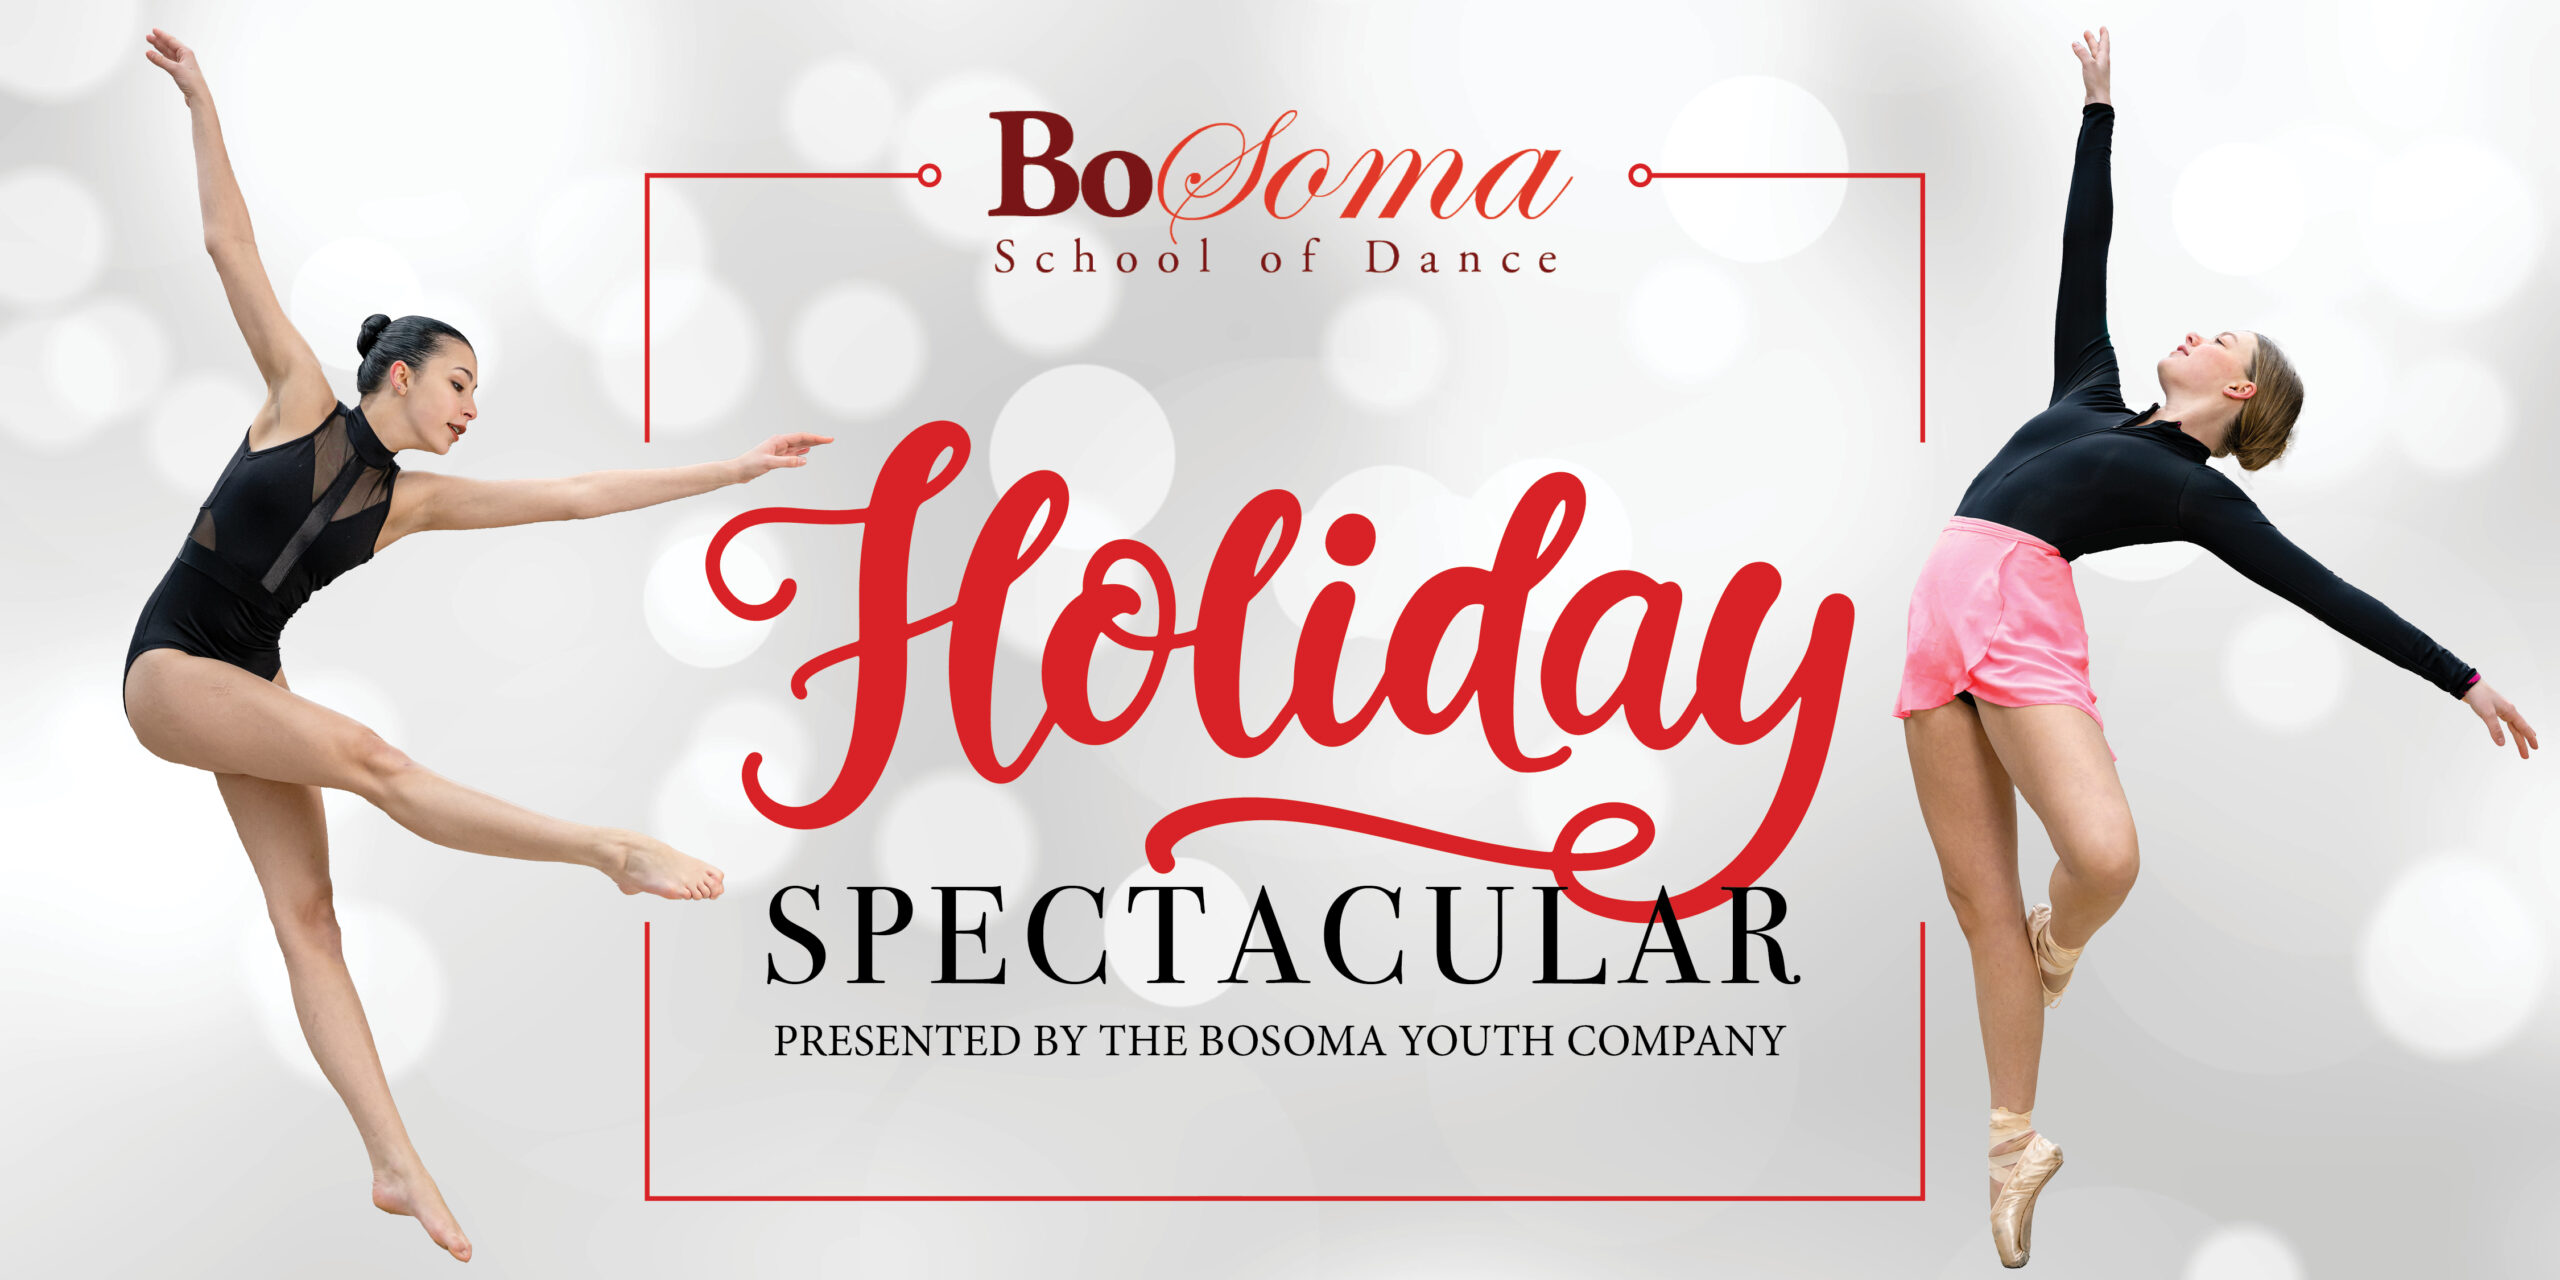 Holiday Spectacular poster with two ballerinas, one on each side of the company logo and the words "Holiday Spectactular"